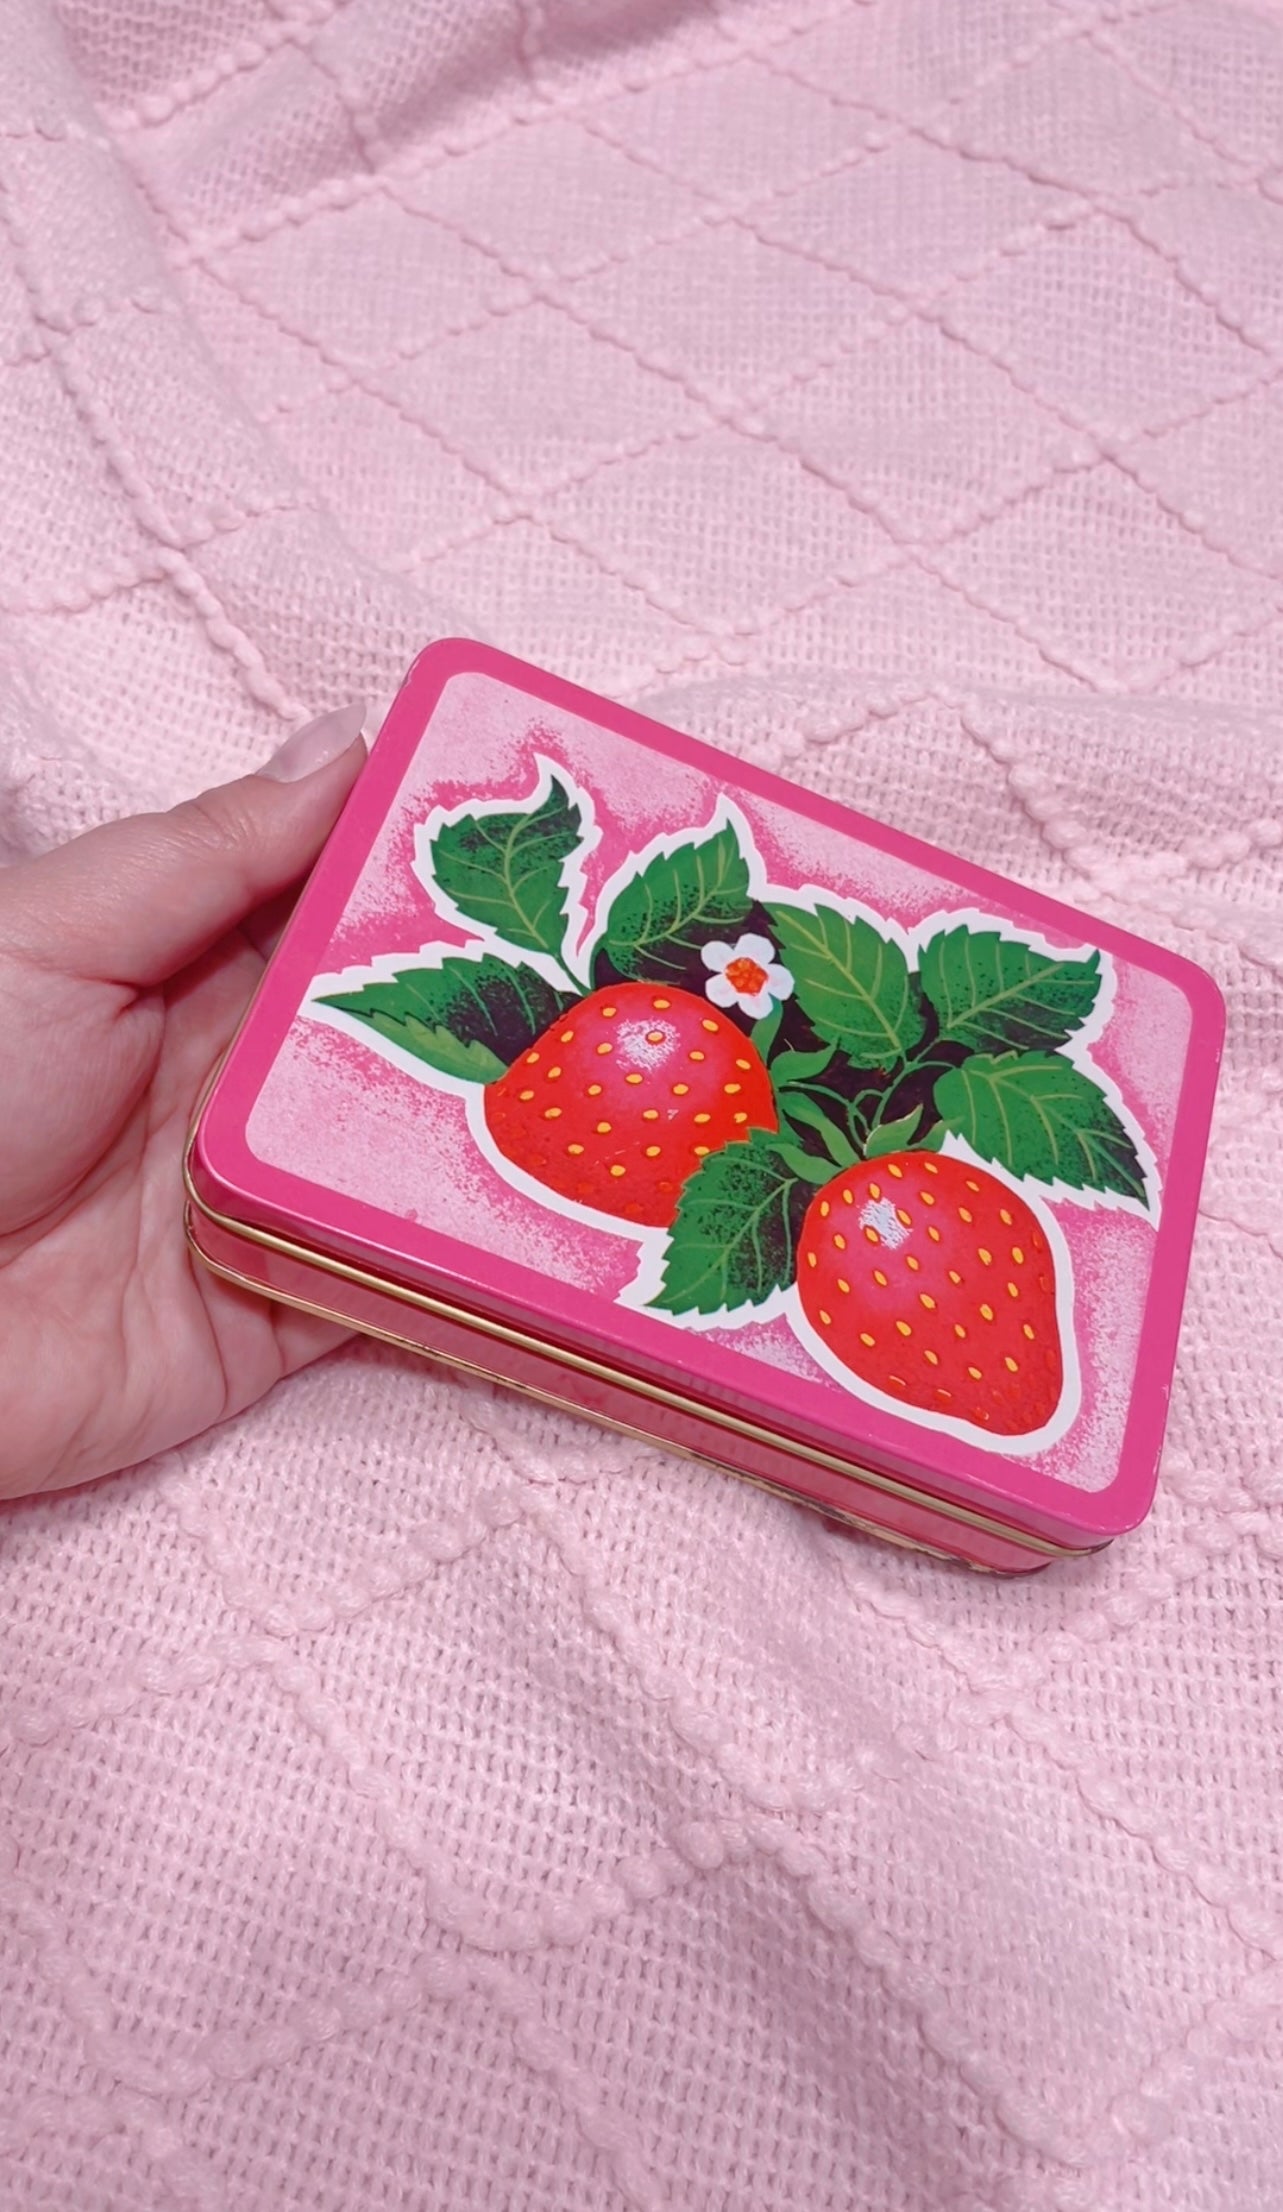 Vintage 1970’s Strawberry Tin with small soaps - made in Hong Kong - collectible